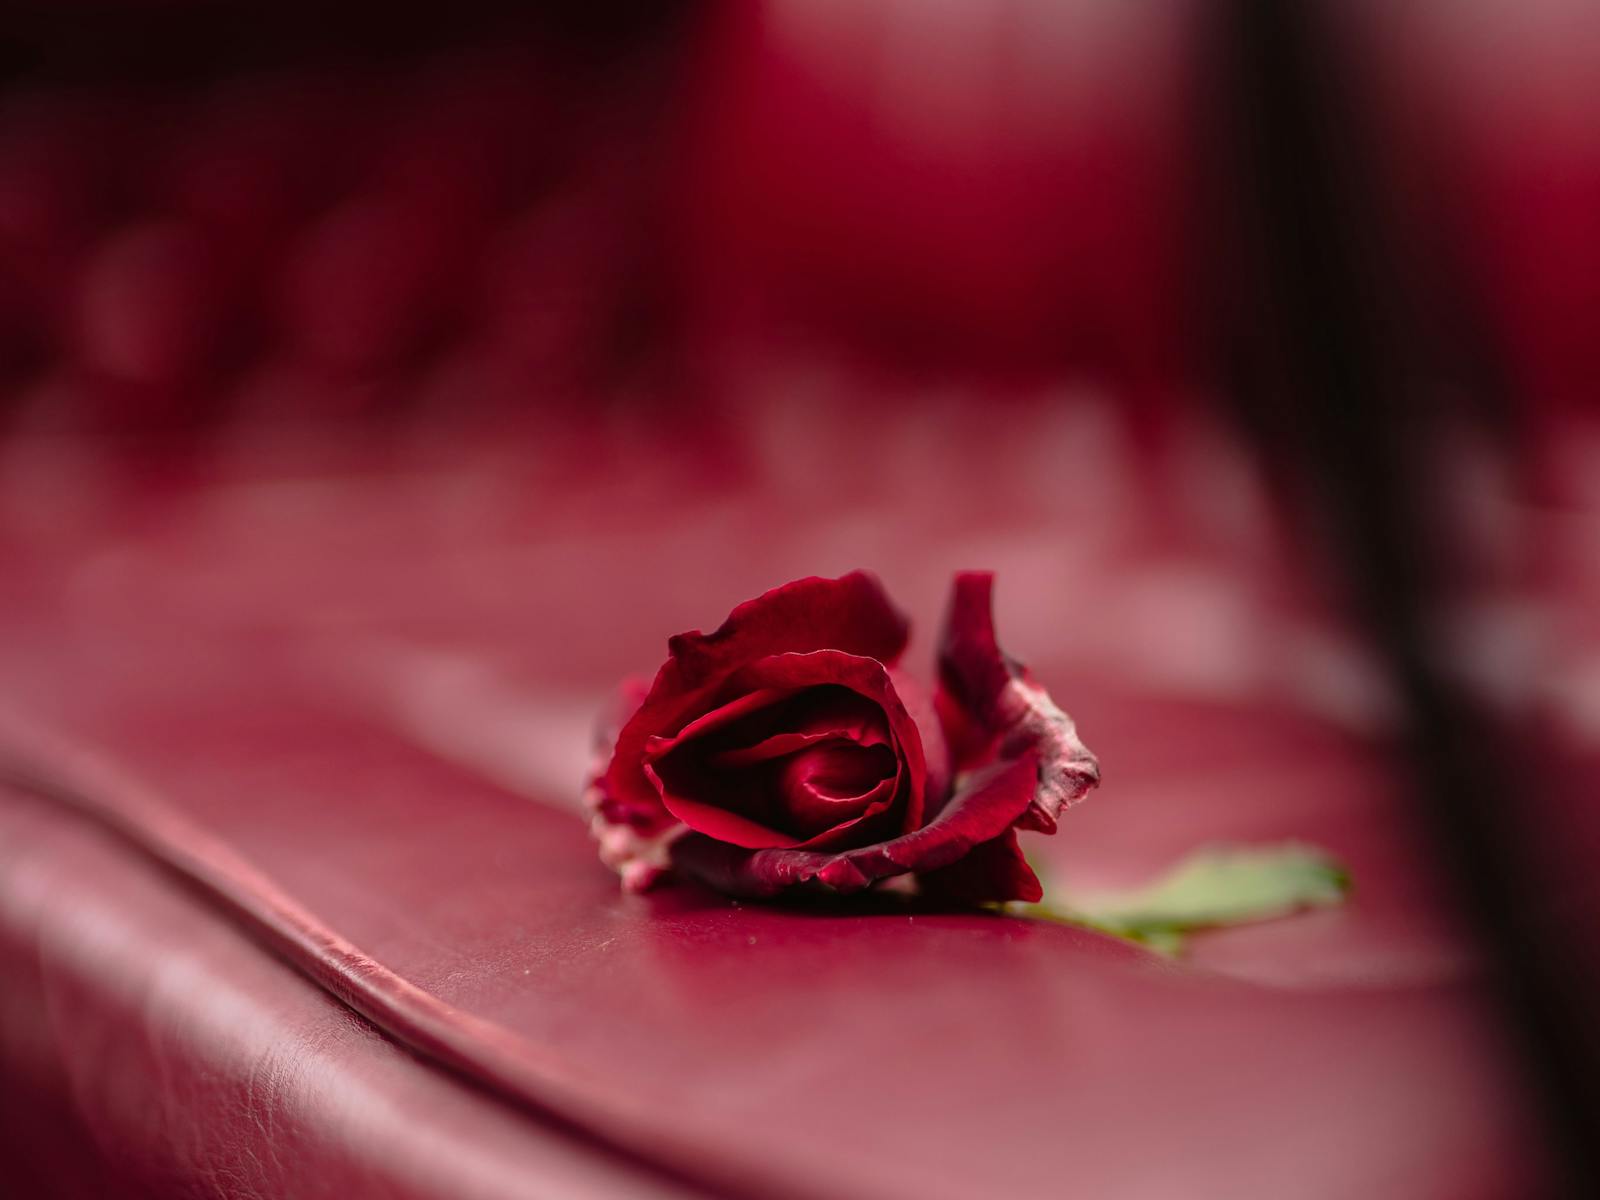 A rose on the carriage seat